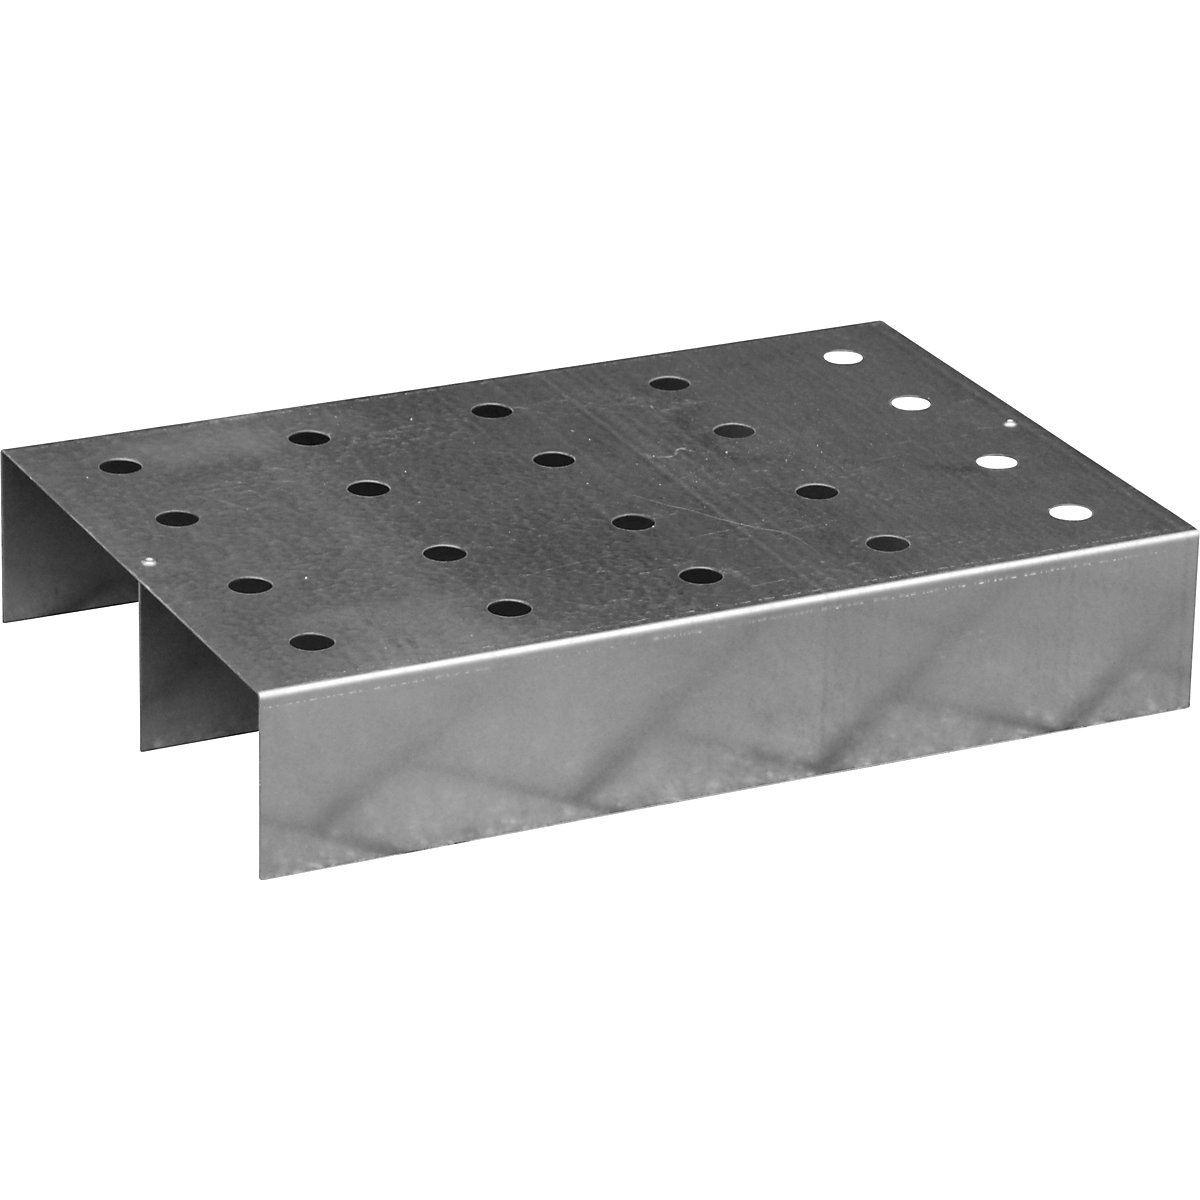 Perforated stainless steel grate - eurokraft pro